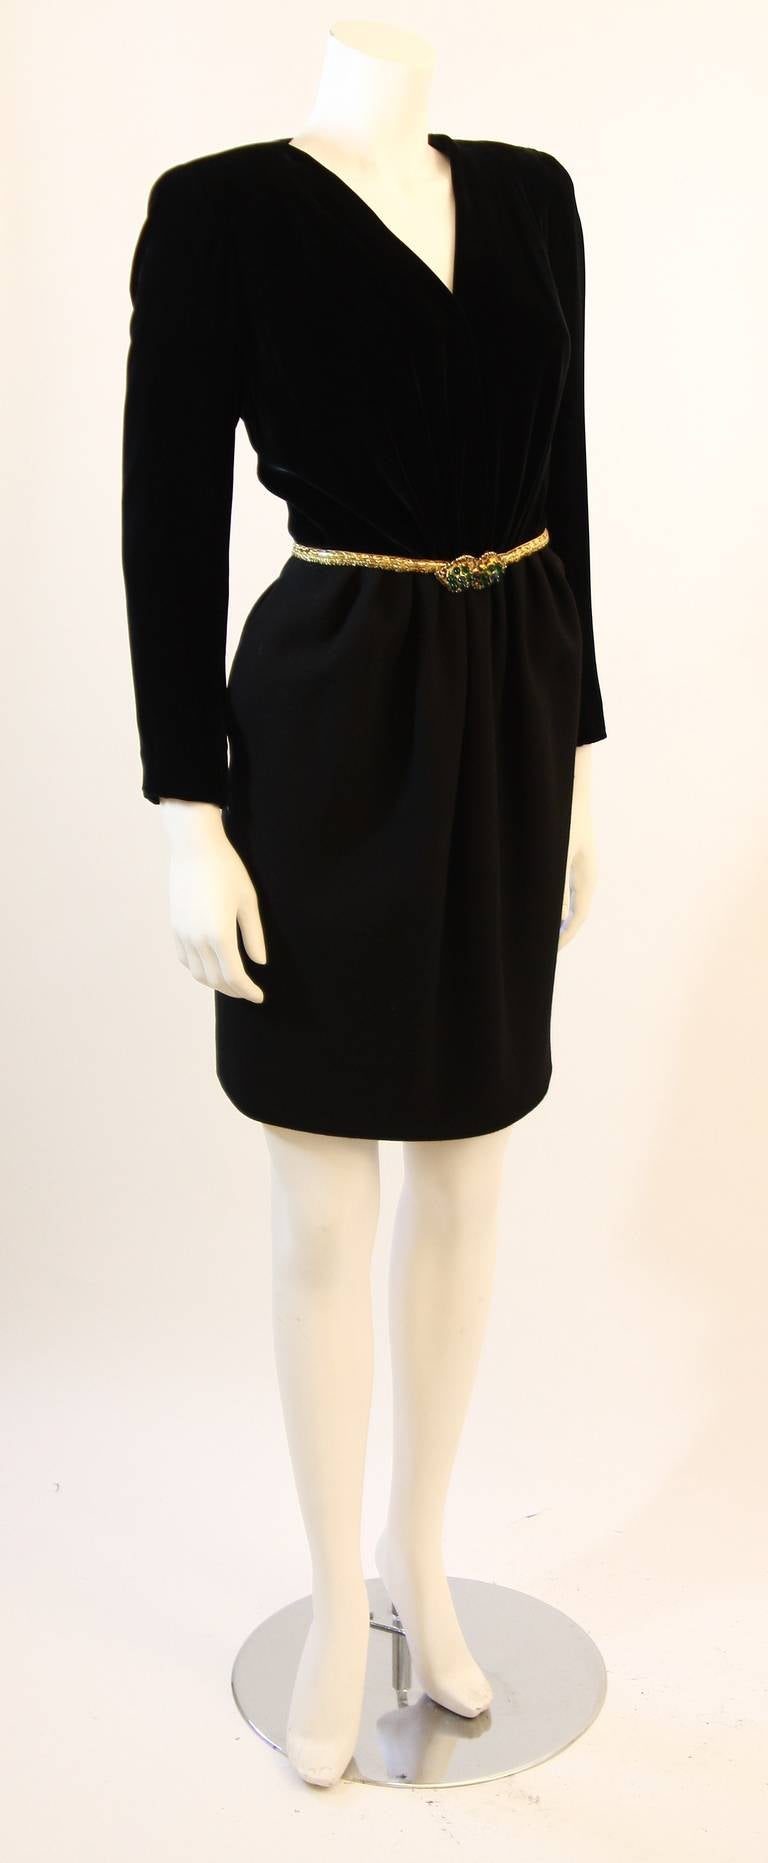 Oscar De La Renta Velvet Bodice Cocktail Dress with Gold and Emerald Detail In Excellent Condition For Sale In Los Angeles, CA